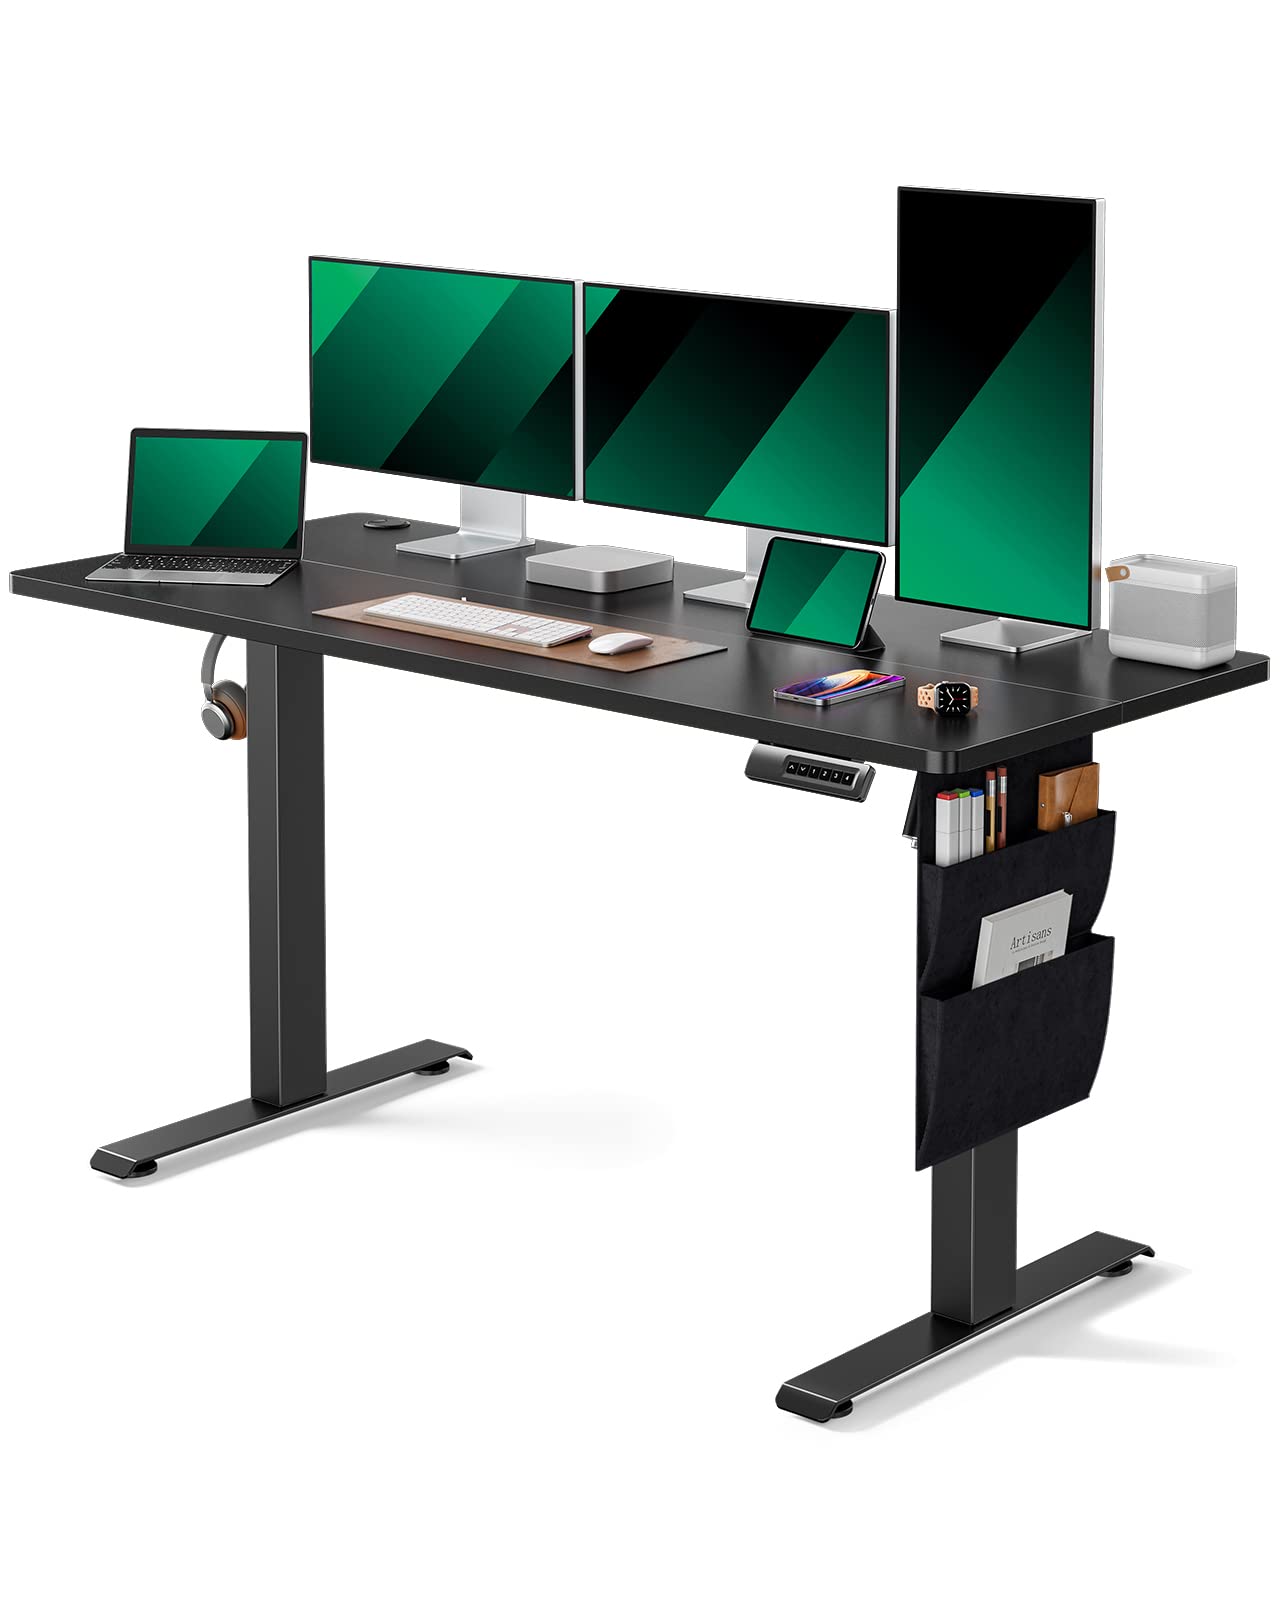 Marsail Standing Desk Adjustable Height, 55x24 Inch Electric Standing Desk with Storage Bag, Stand up Desk for Home Office Computer Desk Memory Preset with Headphone Hook $129.3